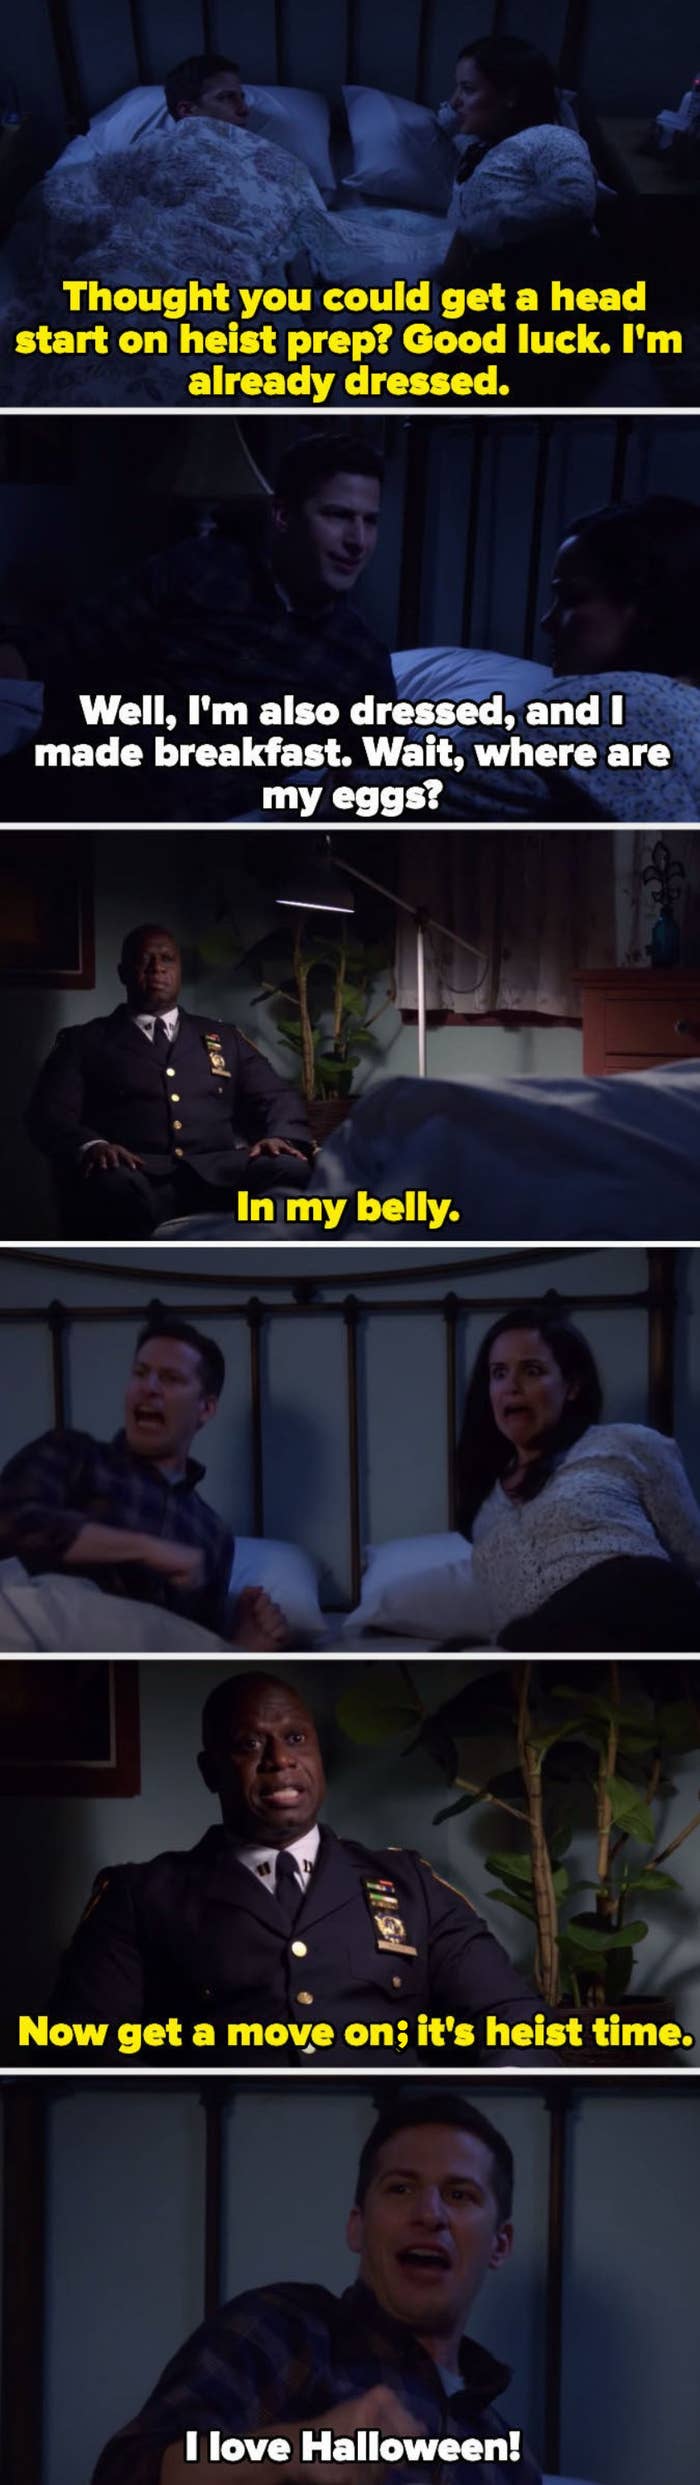 Jake: &quot;I&#x27;m dressed, and I also made breakfast -- wait, where are my eggs?&quot; Captain Holt: &quot;In my belly!&quot;